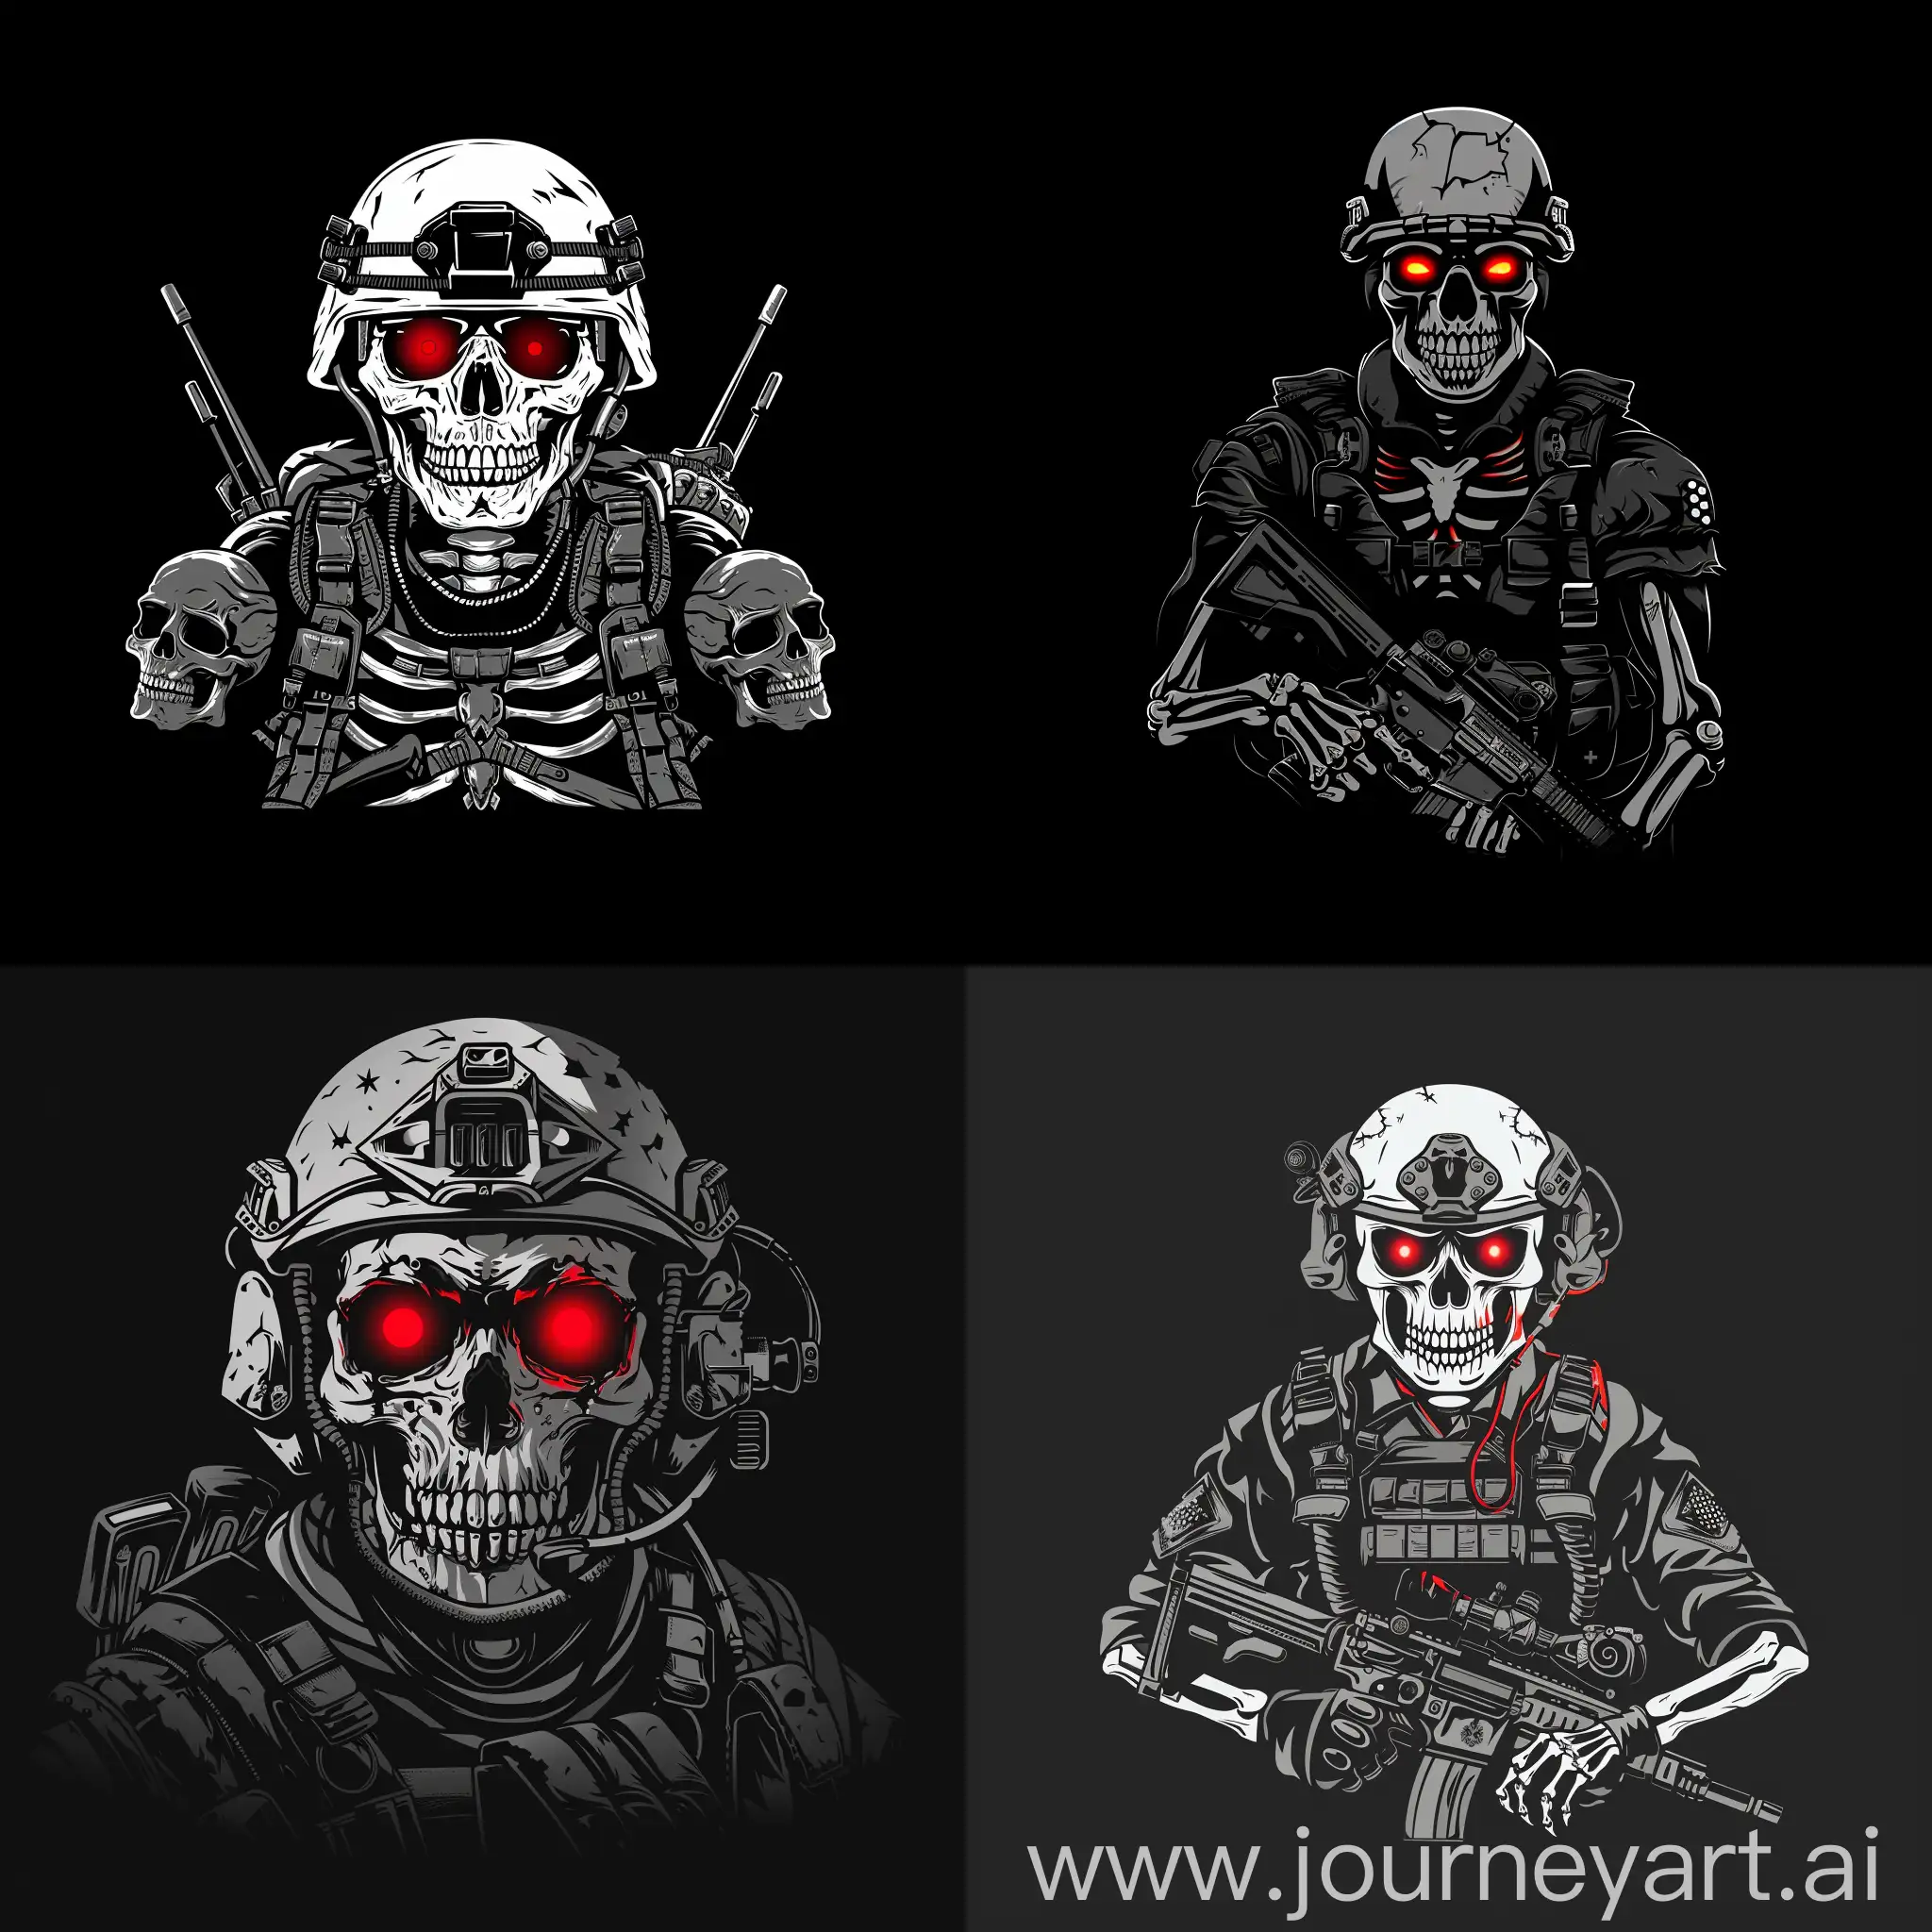 Modern-Minimalistic-Undead-Soldiers-with-Glowing-Red-Eyes